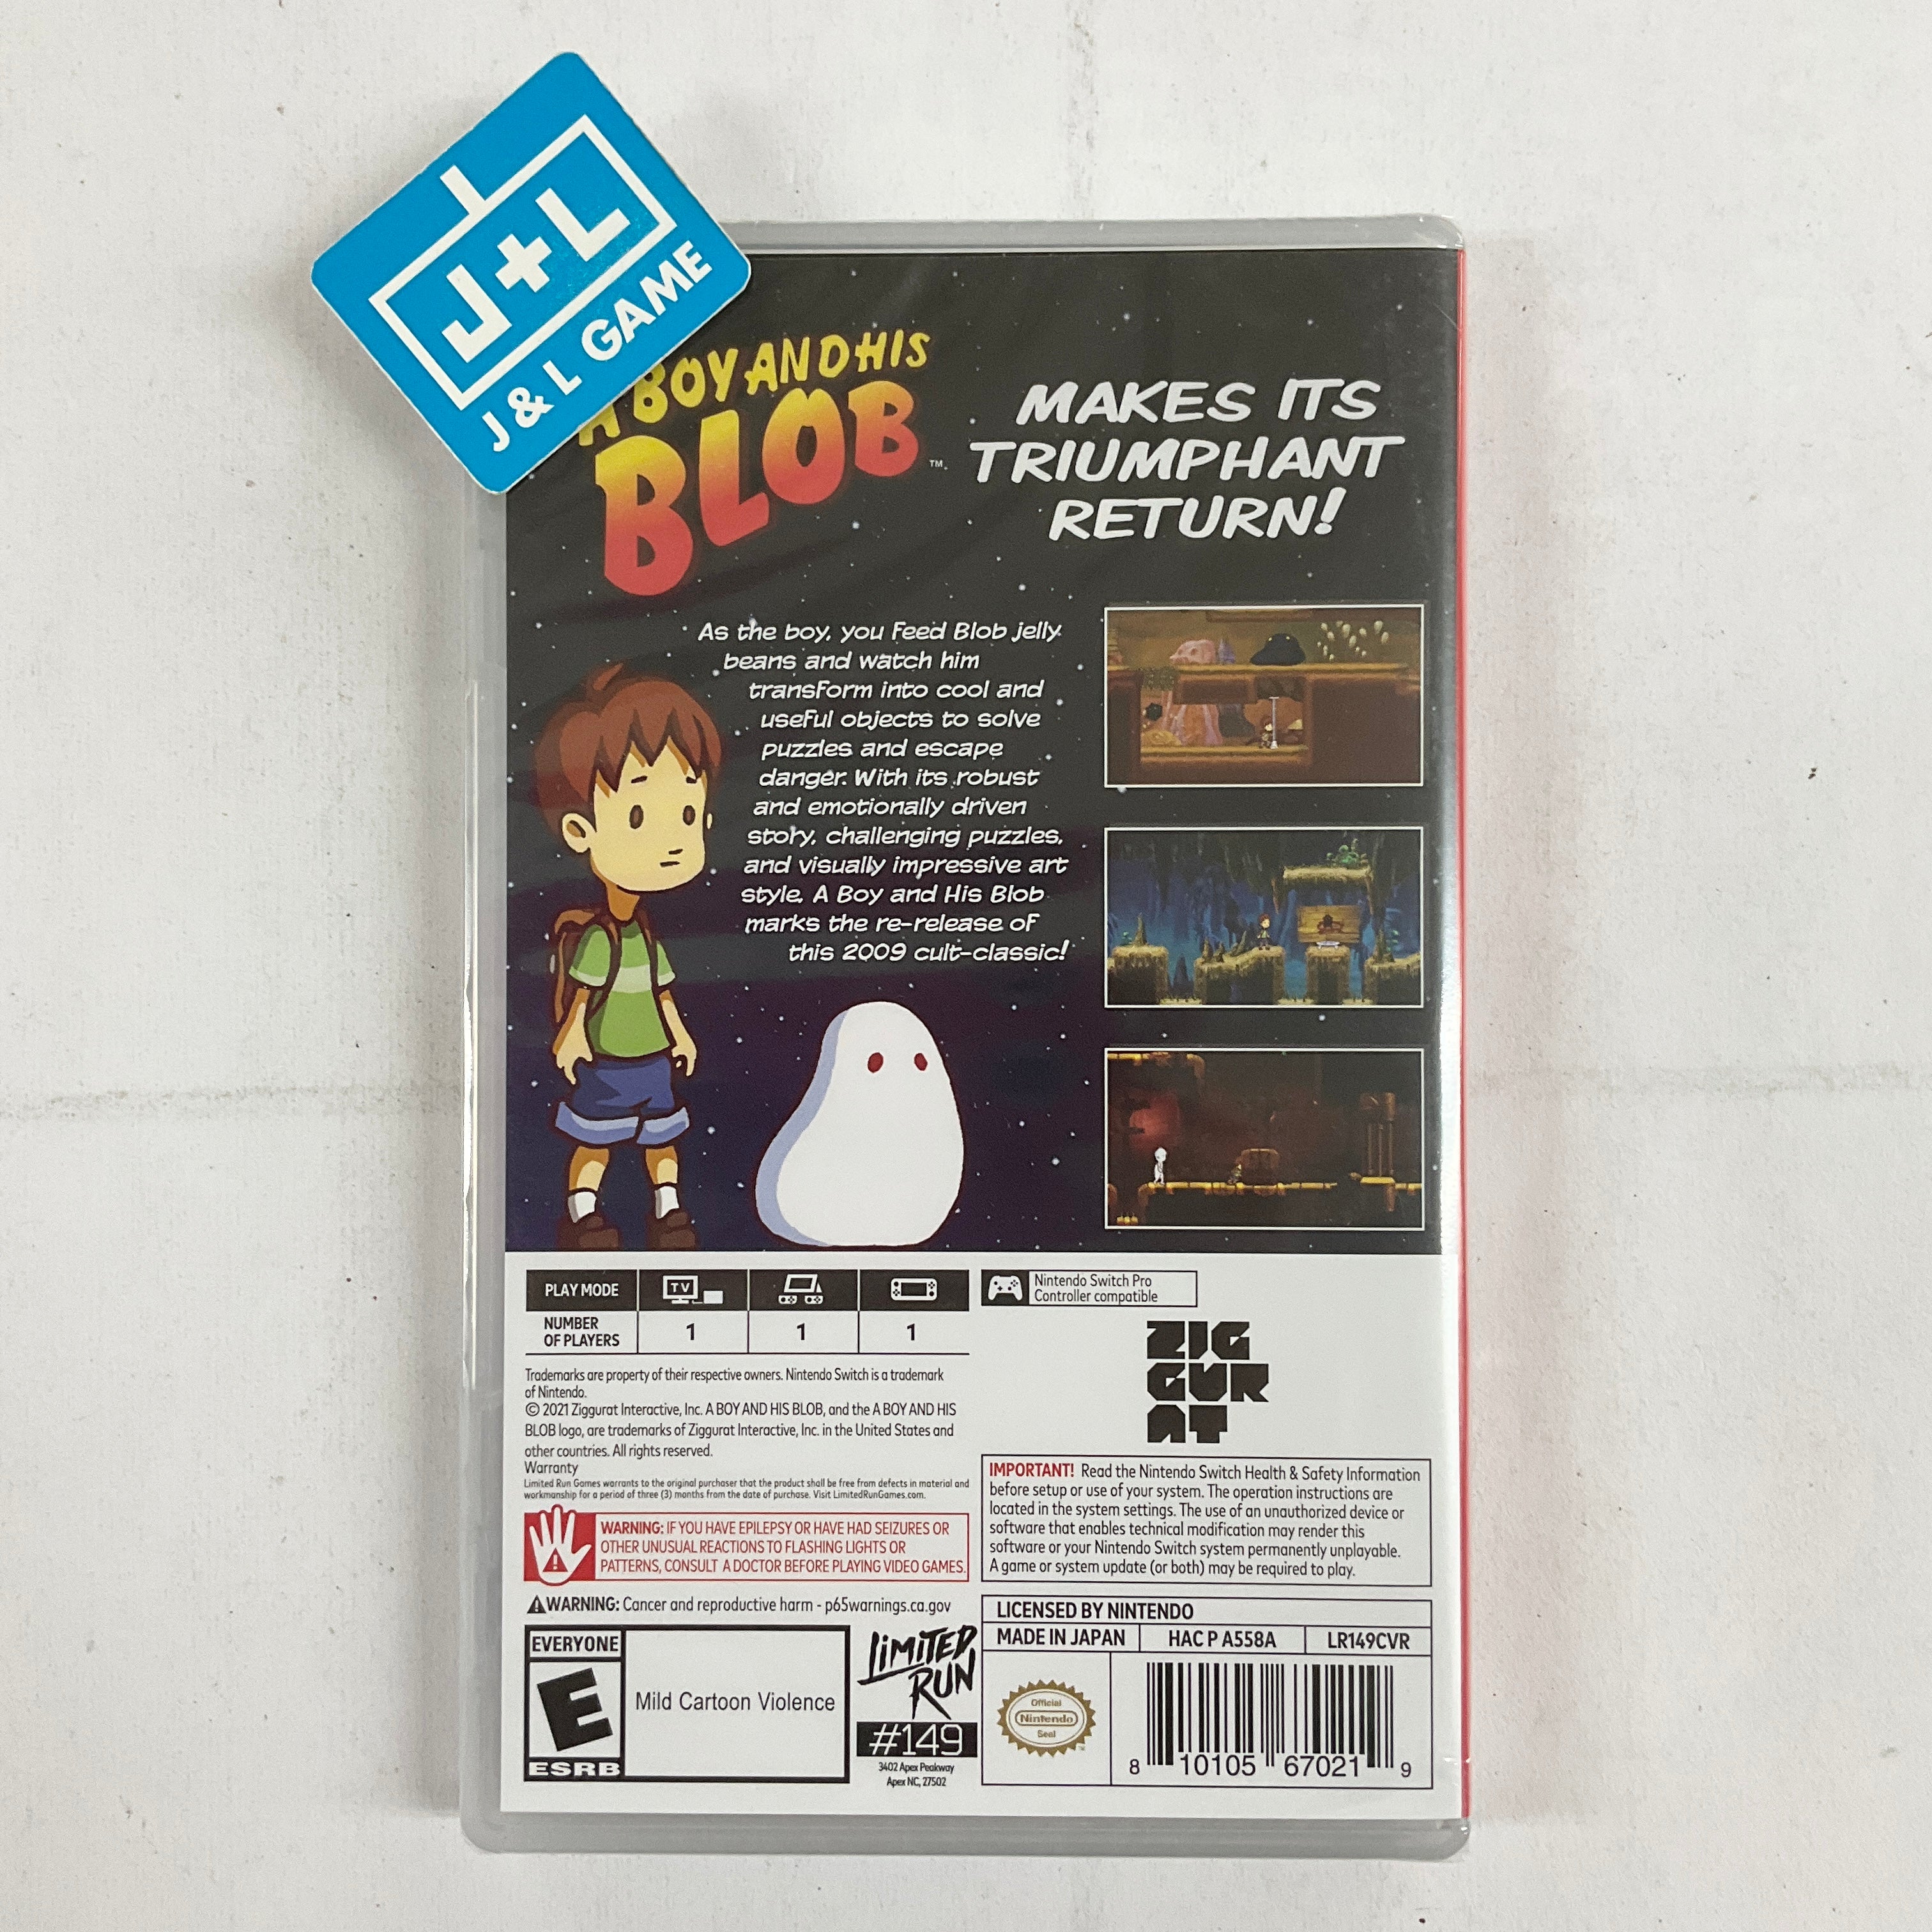 A Boy And His Blob (Limited Run #149) - (NSW) Nintendo Switch Video Games Limited Run Games   